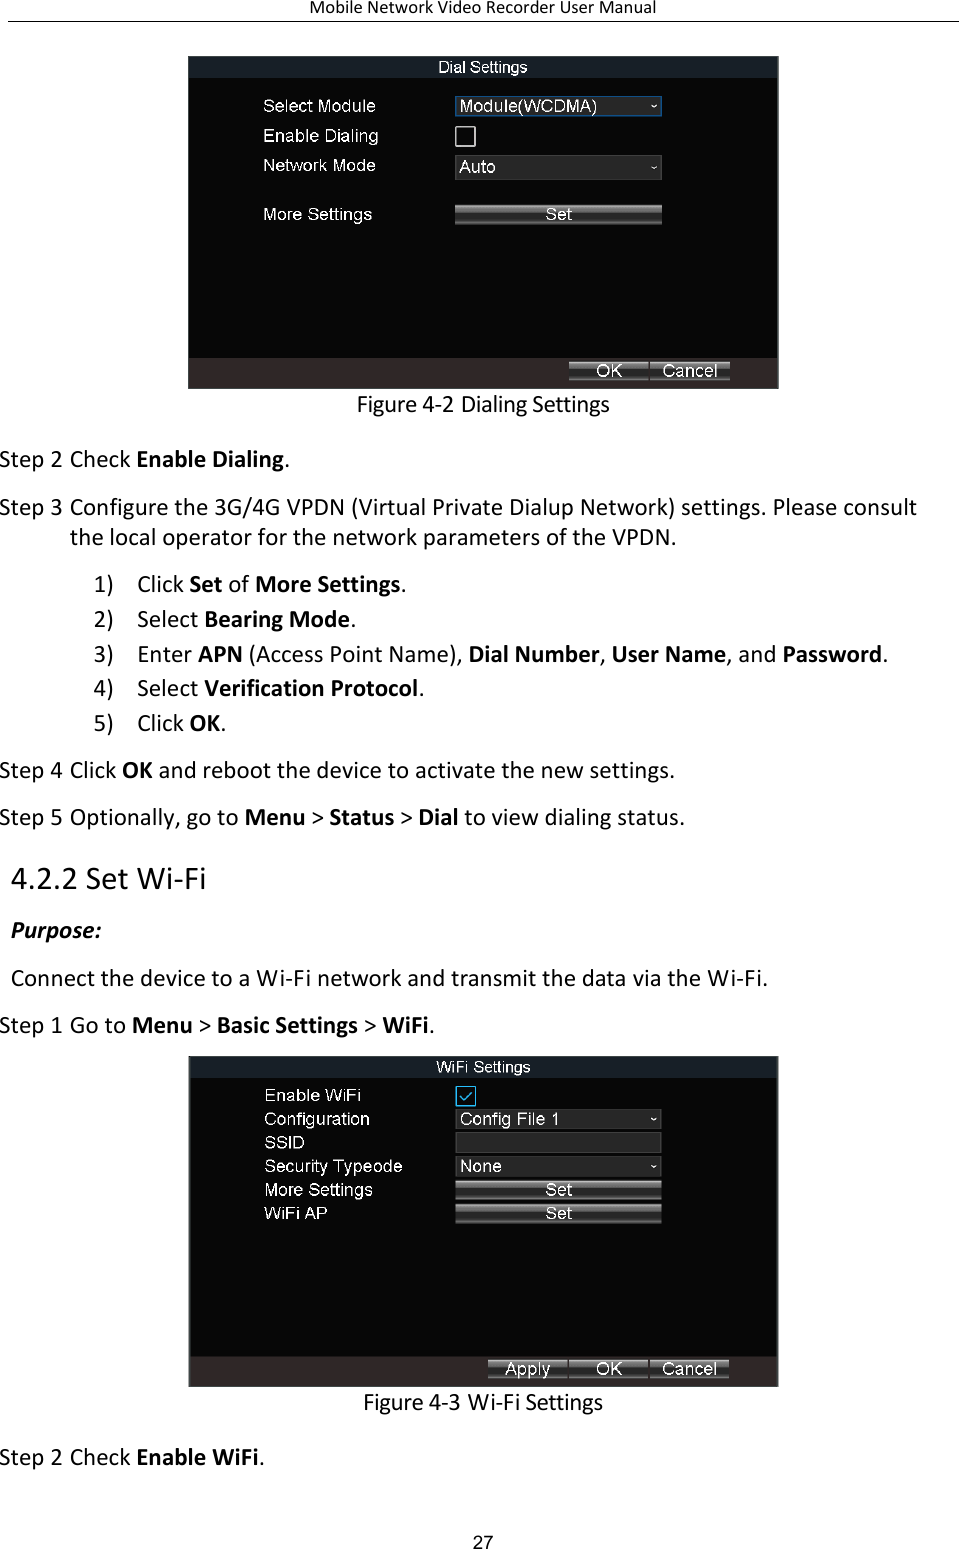 Mobile Network Video Recorder User Manual 27  Figure 4-2 Dialing Settings Step 2 Check Enable Dialing. Step 3 Configure the 3G/4G VPDN (Virtual Private Dialup Network) settings. Please consult the local operator for the network parameters of the VPDN. 1) Click Set of More Settings. 2) Select Bearing Mode. 3) Enter APN (Access Point Name), Dial Number, User Name, and Password.   4) Select Verification Protocol. 5) Click OK. Step 4 Click OK and reboot the device to activate the new settings. Step 5 Optionally, go to Menu &gt; Status &gt; Dial to view dialing status. 4.2.2 Set Wi-Fi Purpose: Connect the device to a Wi-Fi network and transmit the data via the Wi-Fi. Step 1 Go to Menu &gt; Basic Settings &gt; WiFi.  Figure 4-3 Wi-Fi Settings Step 2 Check Enable WiFi. 